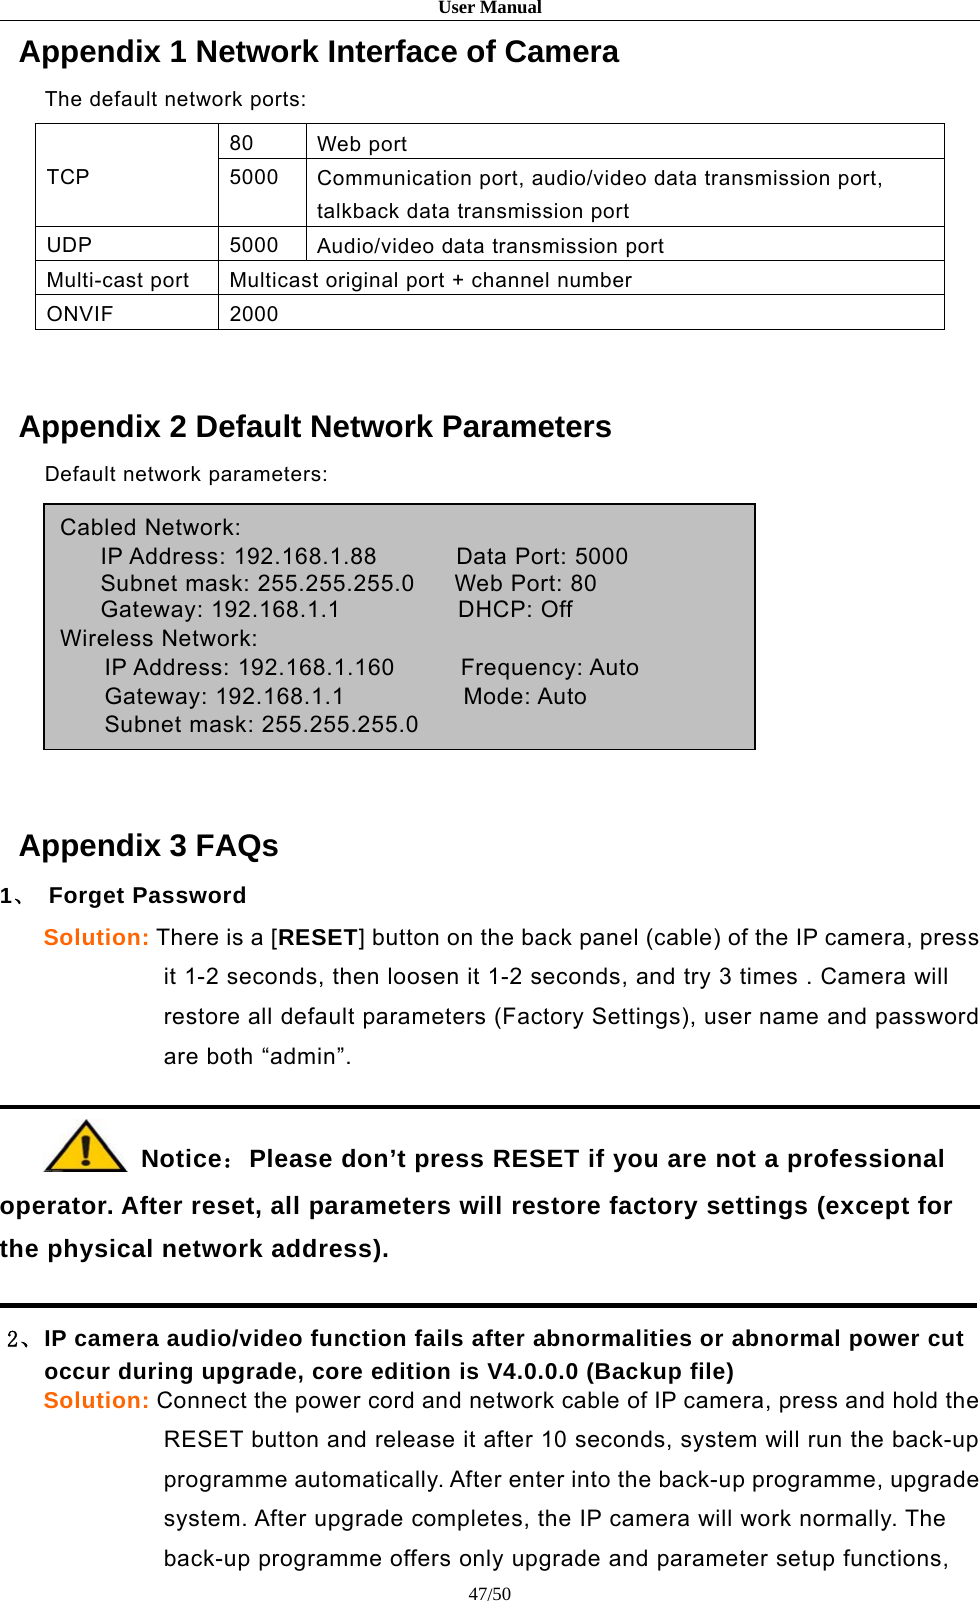 User Manual47/50Appendix 1 Network Interface of CameraThe default network ports:TCP80 Web port5000 Communication port, audio/video data transmission port,talkback data transmission portUDP 5000 Audio/video data transmission portMulti-cast port Multicast original port + channel numberONVIF 2000Appendix 2 Default Network ParametersDefault network parameters:Cabled Network:IP Address: 192.168.1.88 Data Port: 5000Subnet mask: 255.255.255.0 Web Port: 80Gateway: 192.168.1.1 DHCP: OffWireless Network:IP Address: 192.168.1.160 Frequency: AutoGateway: 192.168.1.1 Mode: AutoSubnet mask: 255.255.255.0Appendix 3 FAQs1、Forget PasswordSolution: There is a [RESET] button on the back panel (cable) of the IP camera, pressit 1-2 seconds, then loosen it 1-2 seconds, and try 3 times . Camera willrestore all default parameters (Factory Settings), user name and passwordare both “admin”.Notice：Please don’t press RESET if you are not a professionaloperator. After reset, all parameters will restore factory settings (except forthe physical network address).2、IP camera audio/video function fails after abnormalities or abnormal power cutoccur during upgrade, core edition is V4.0.0.0 (Backup file)Solution: Connect the power cord and network cable of IP camera, press and hold theRESET button and release it after 10 seconds, system will run the back-upprogramme automatically. After enter into the back-up programme, upgradesystem. After upgrade completes, the IP camera will work normally. Theback-up programme offers only upgrade and parameter setup functions,